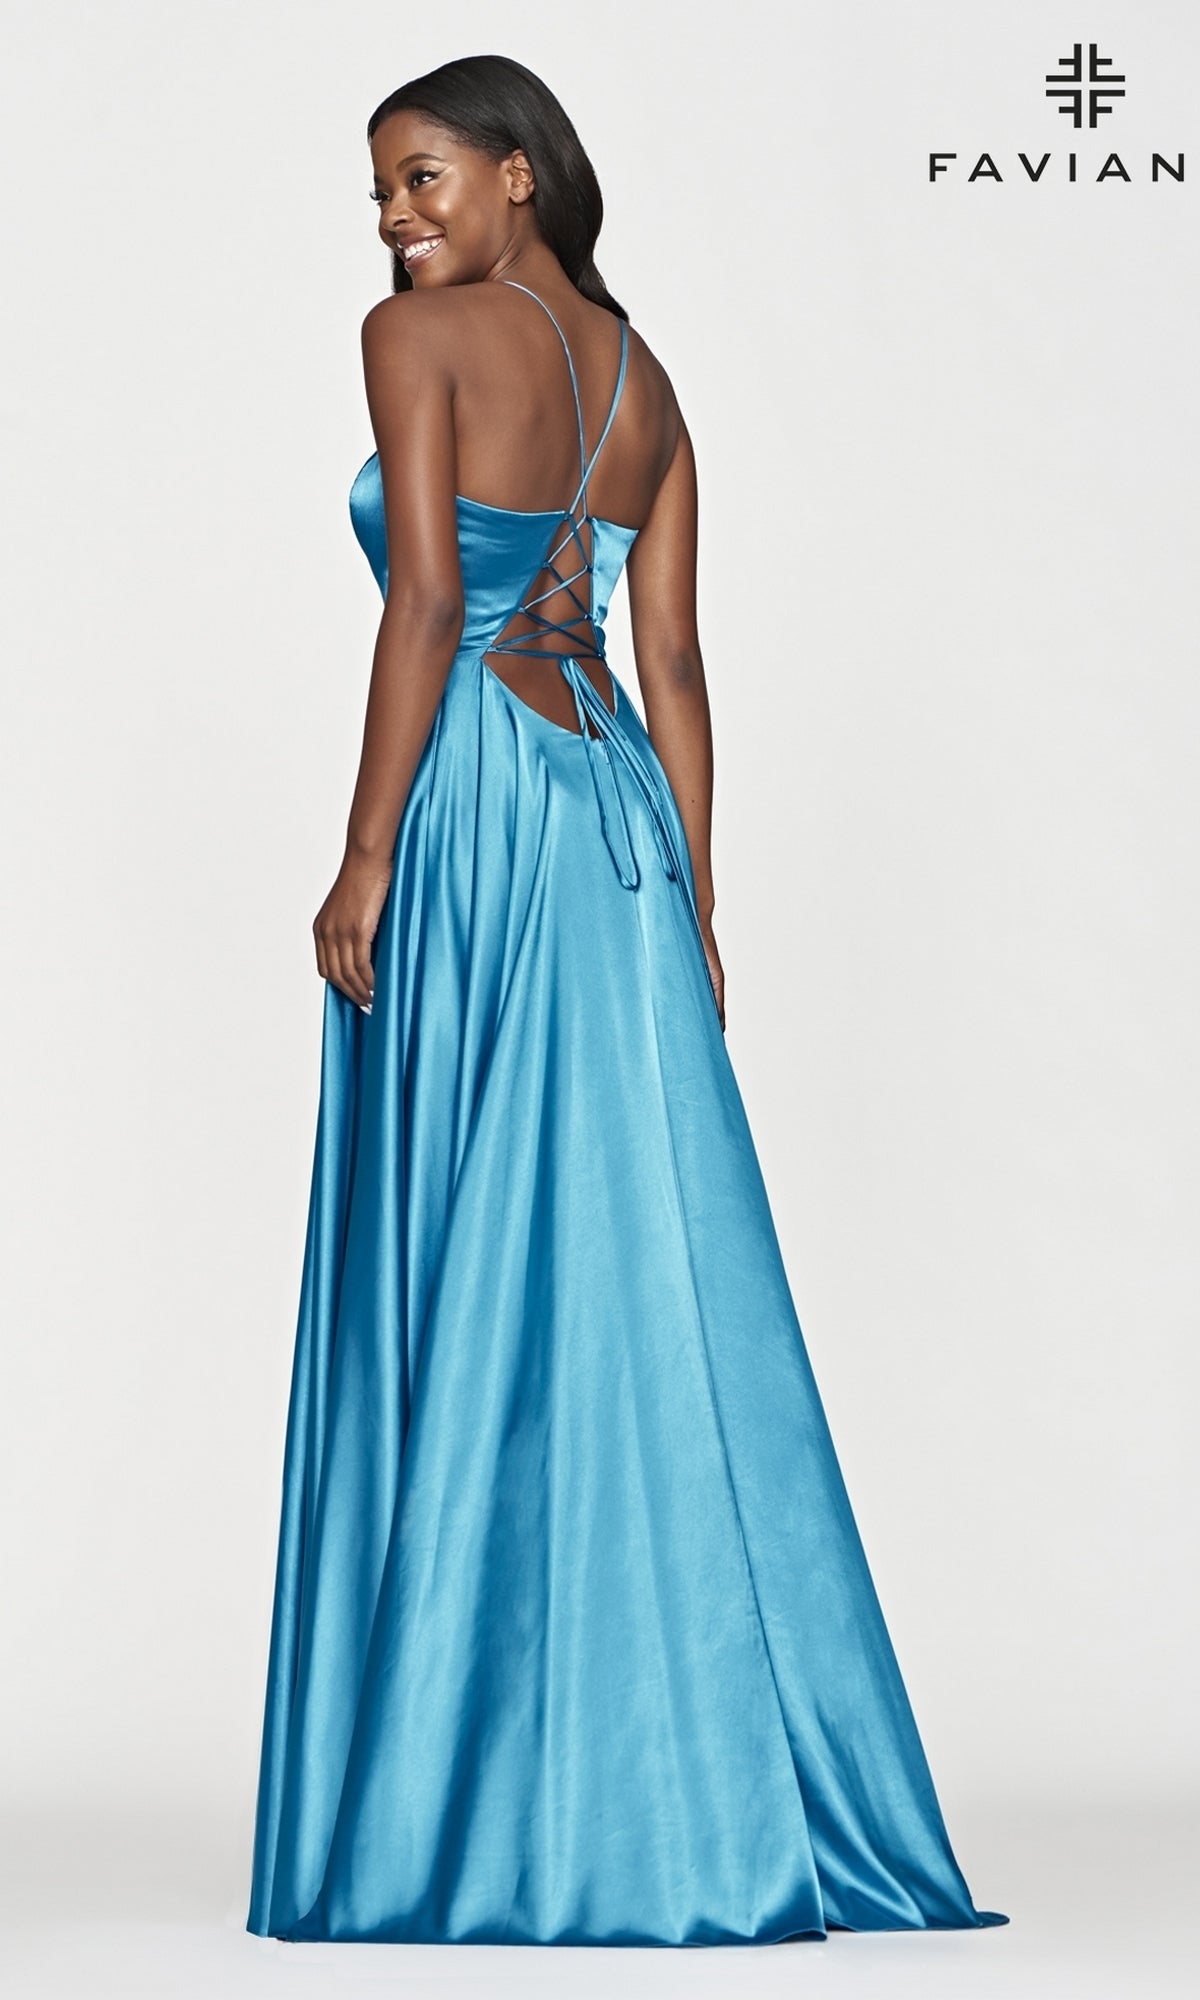 Long Faviana Prom Dress with Back Cut Out